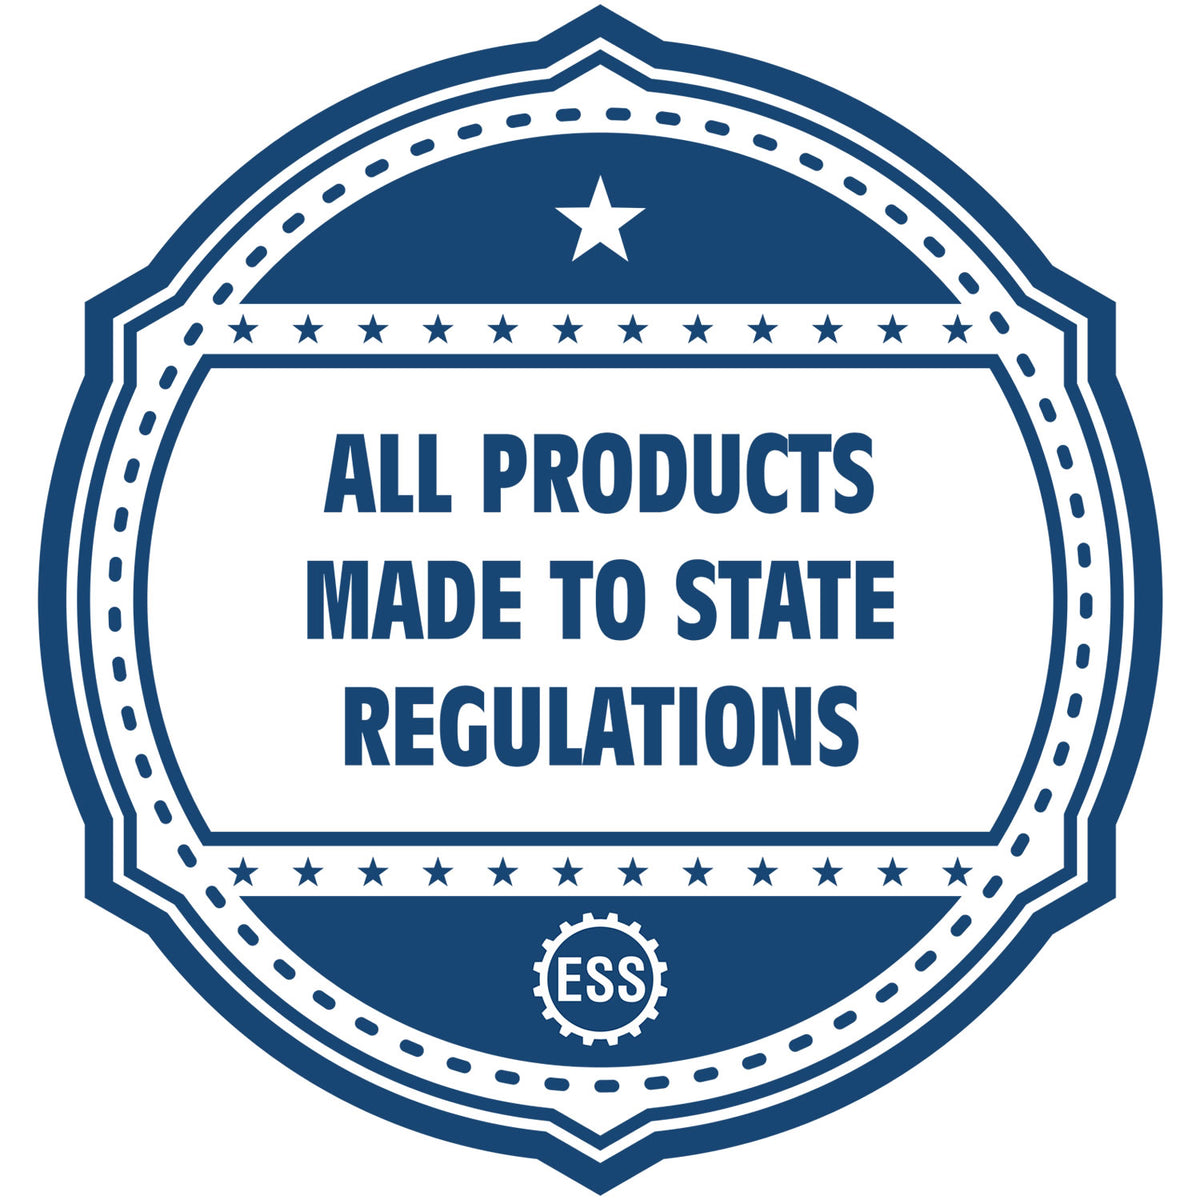 An icon or badge element for the North Dakota Professional Engineer Seal Stamp showing that this product is made in compliance with state regulations.